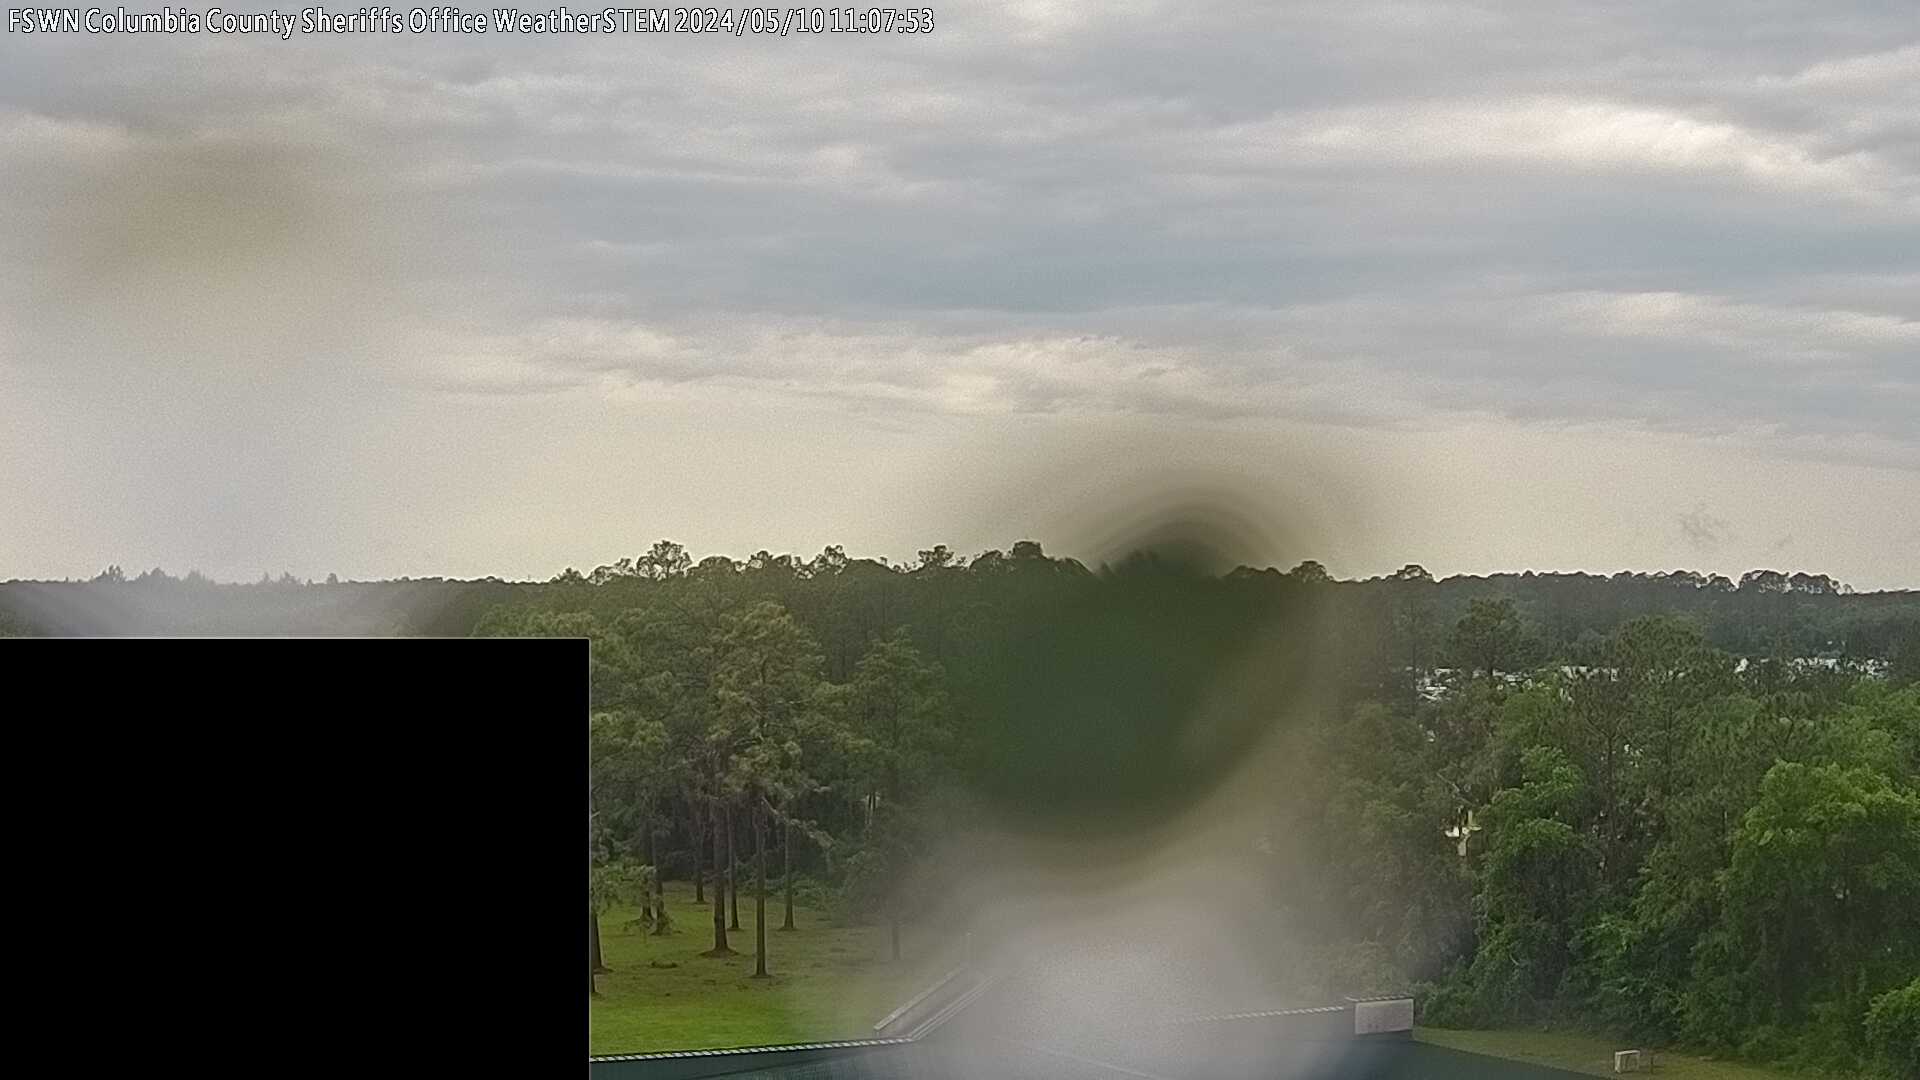  WeatherSTEM Cloud Camera FSWNCCSO in Columbia County, Florida FL at FSWN Columbia County Sheriff's Office